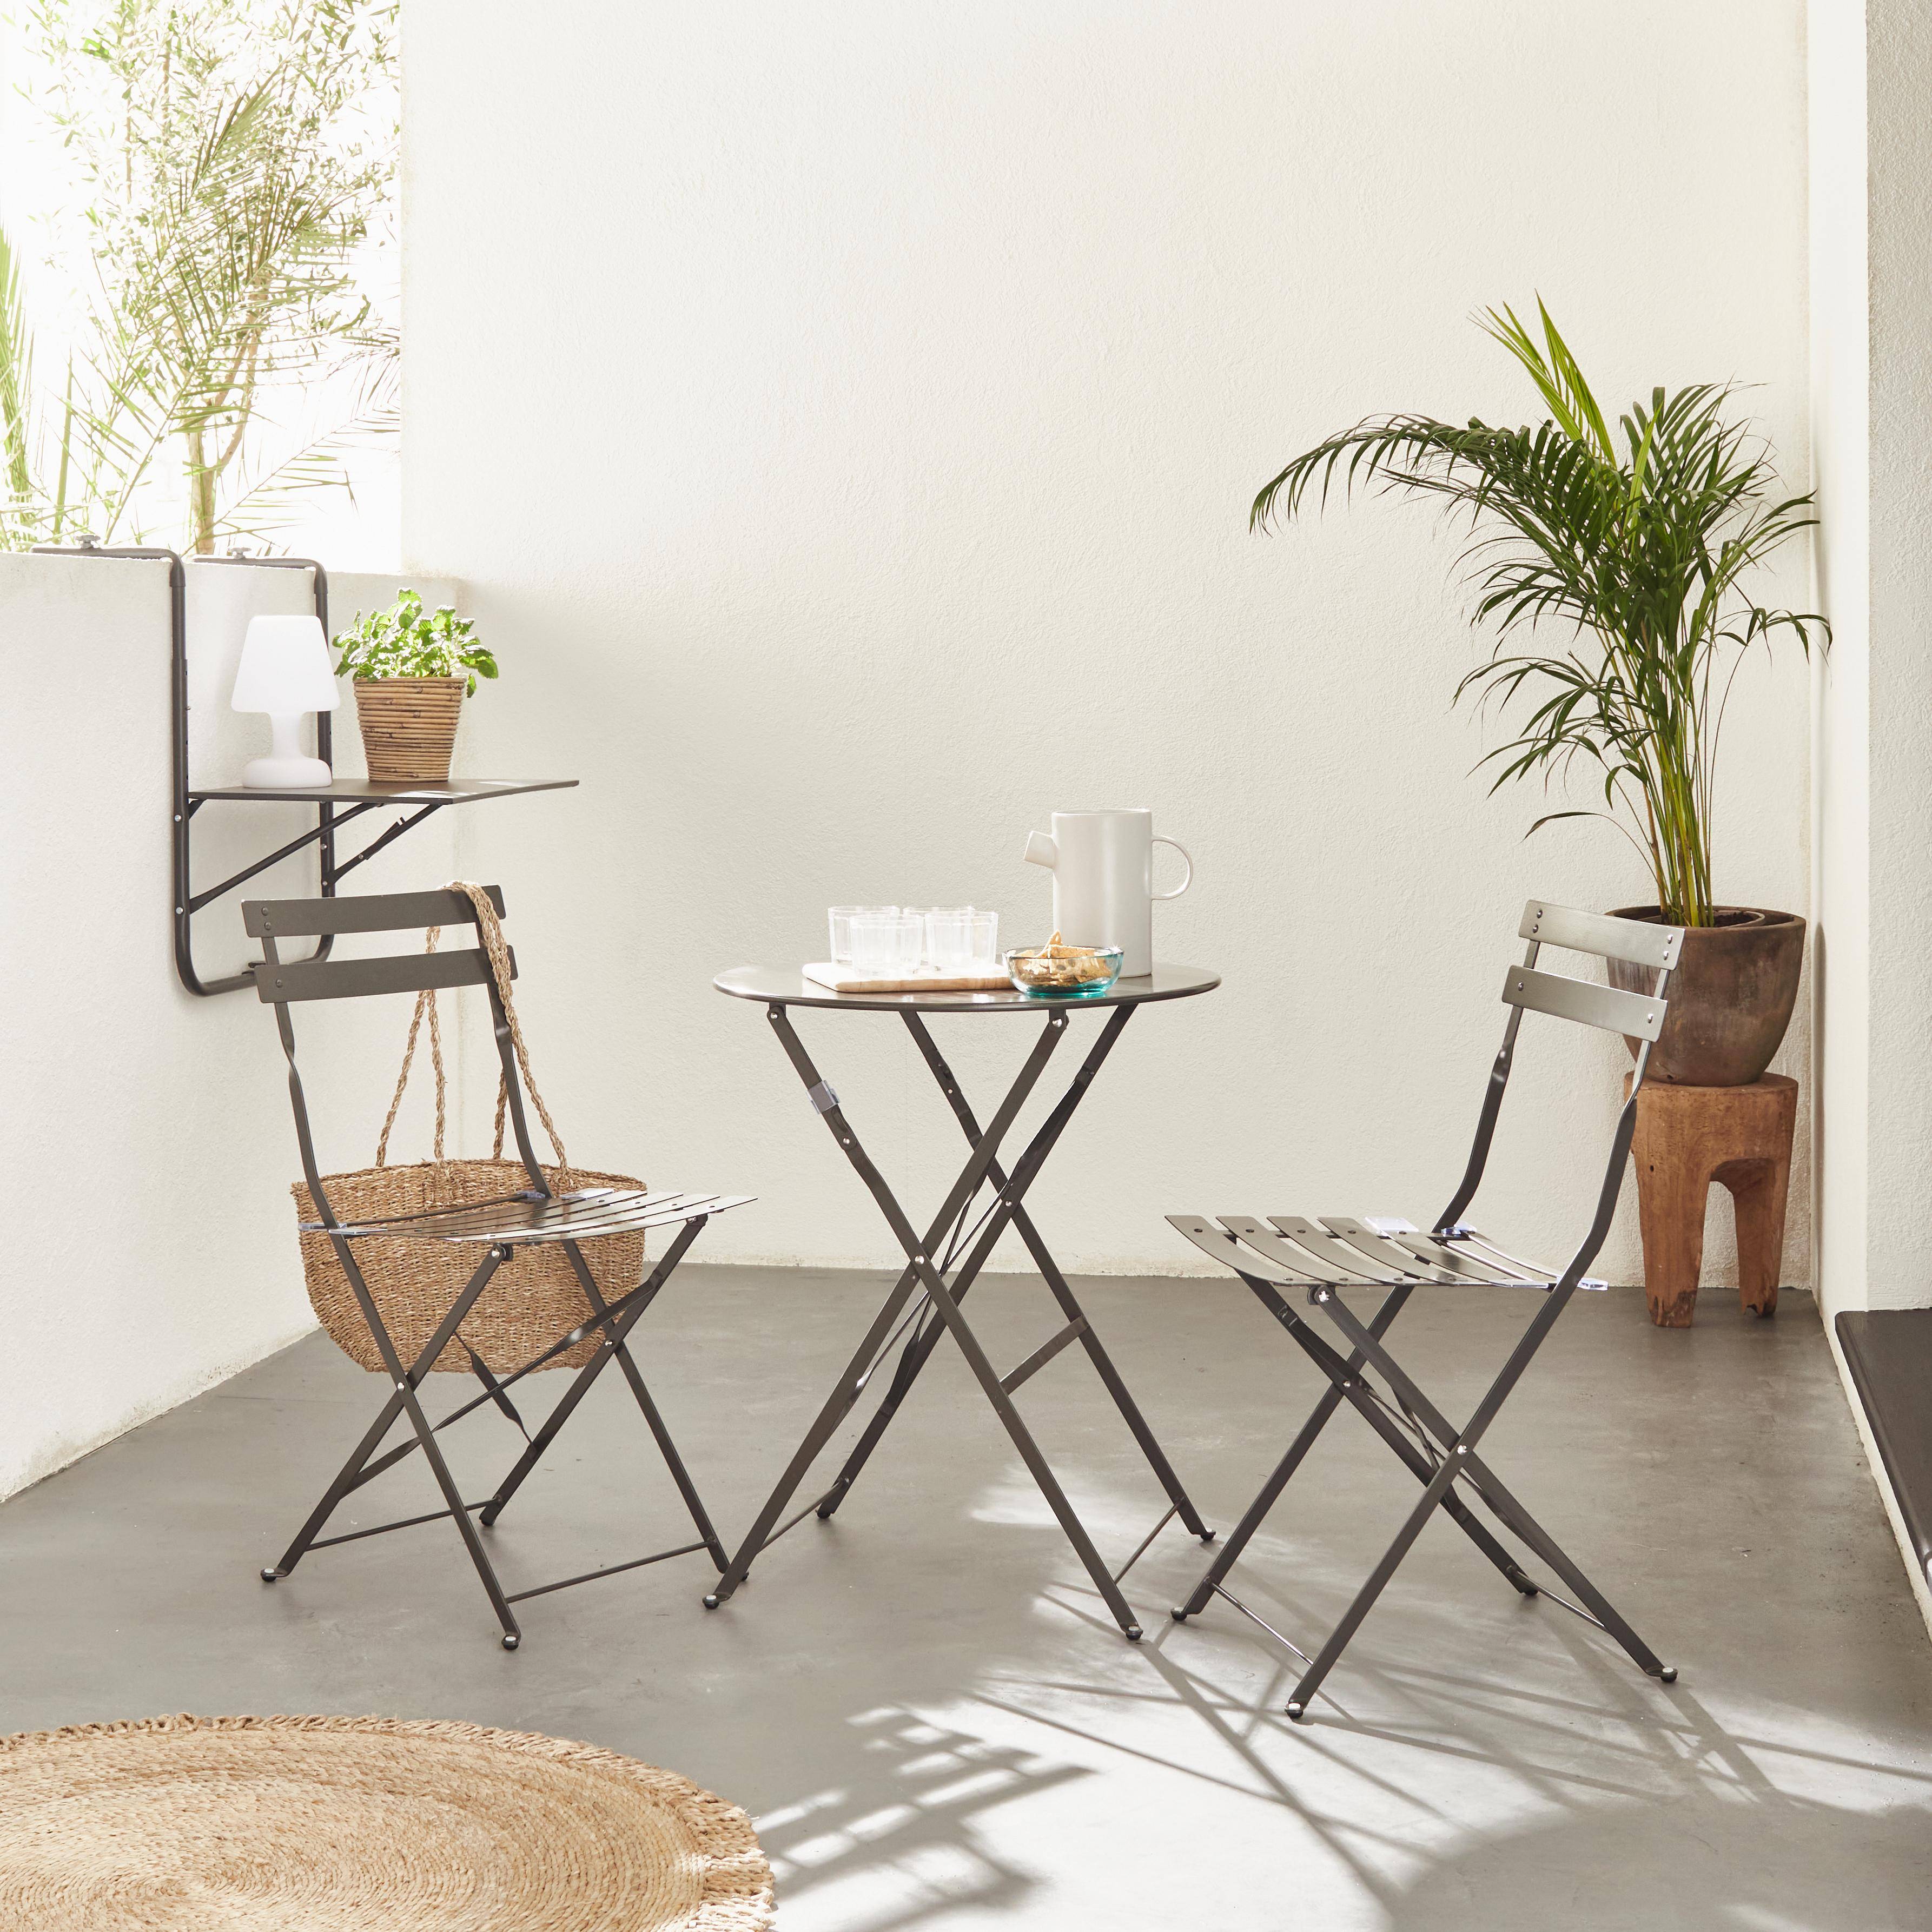 Foldable bistro garden table - Round Emilia anthracite- Round table Ø60cm, thermo-lacquered steel,sweeek,Photo3